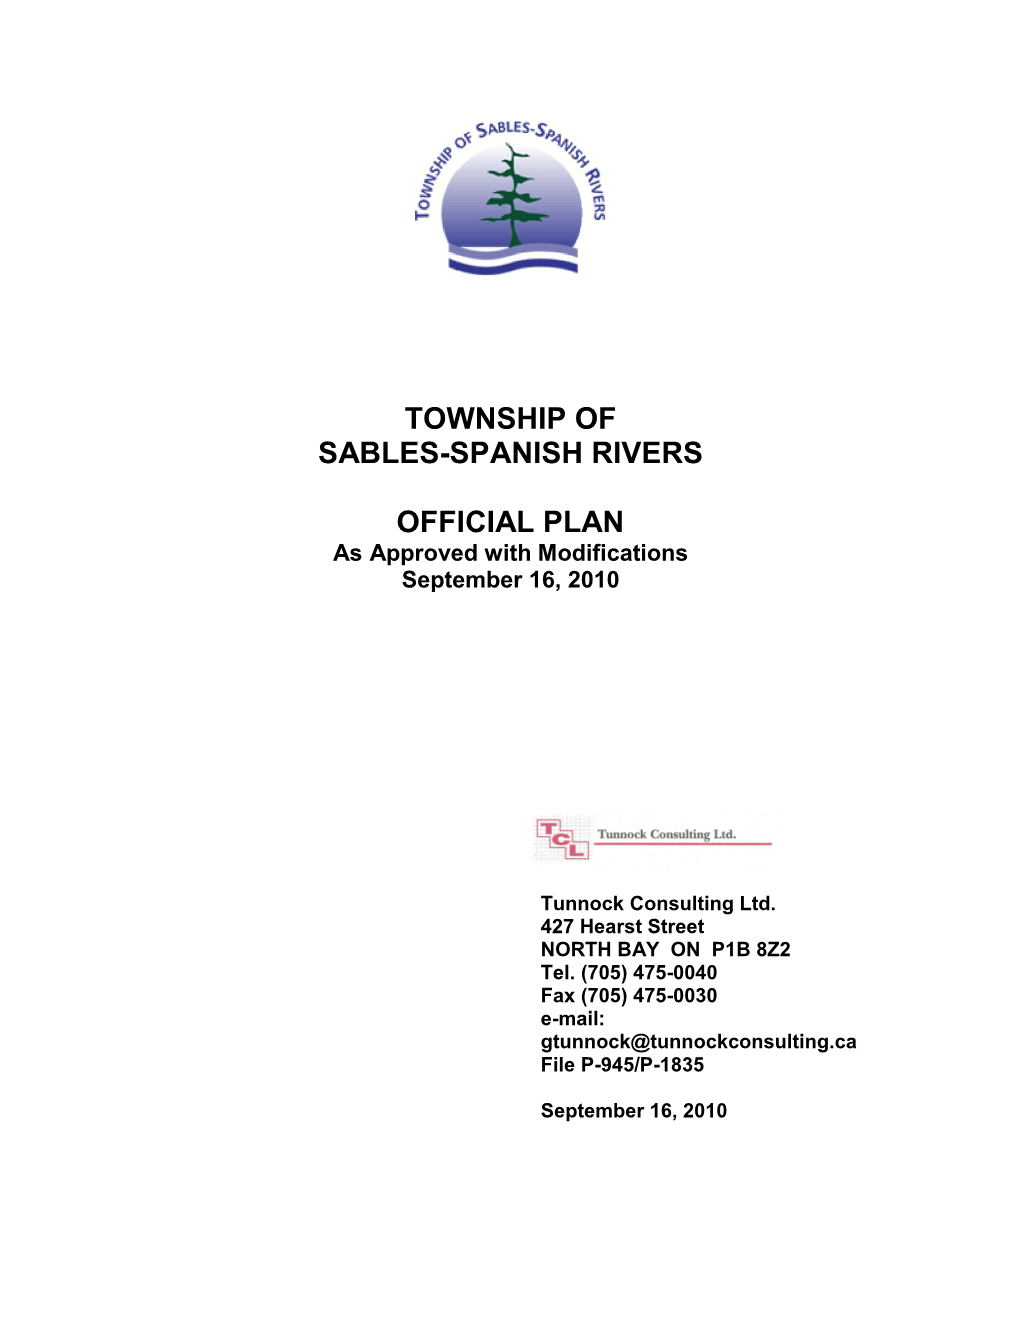 Township of Sables-Spanish Rivers Official Plan TABLE of CONTENTS